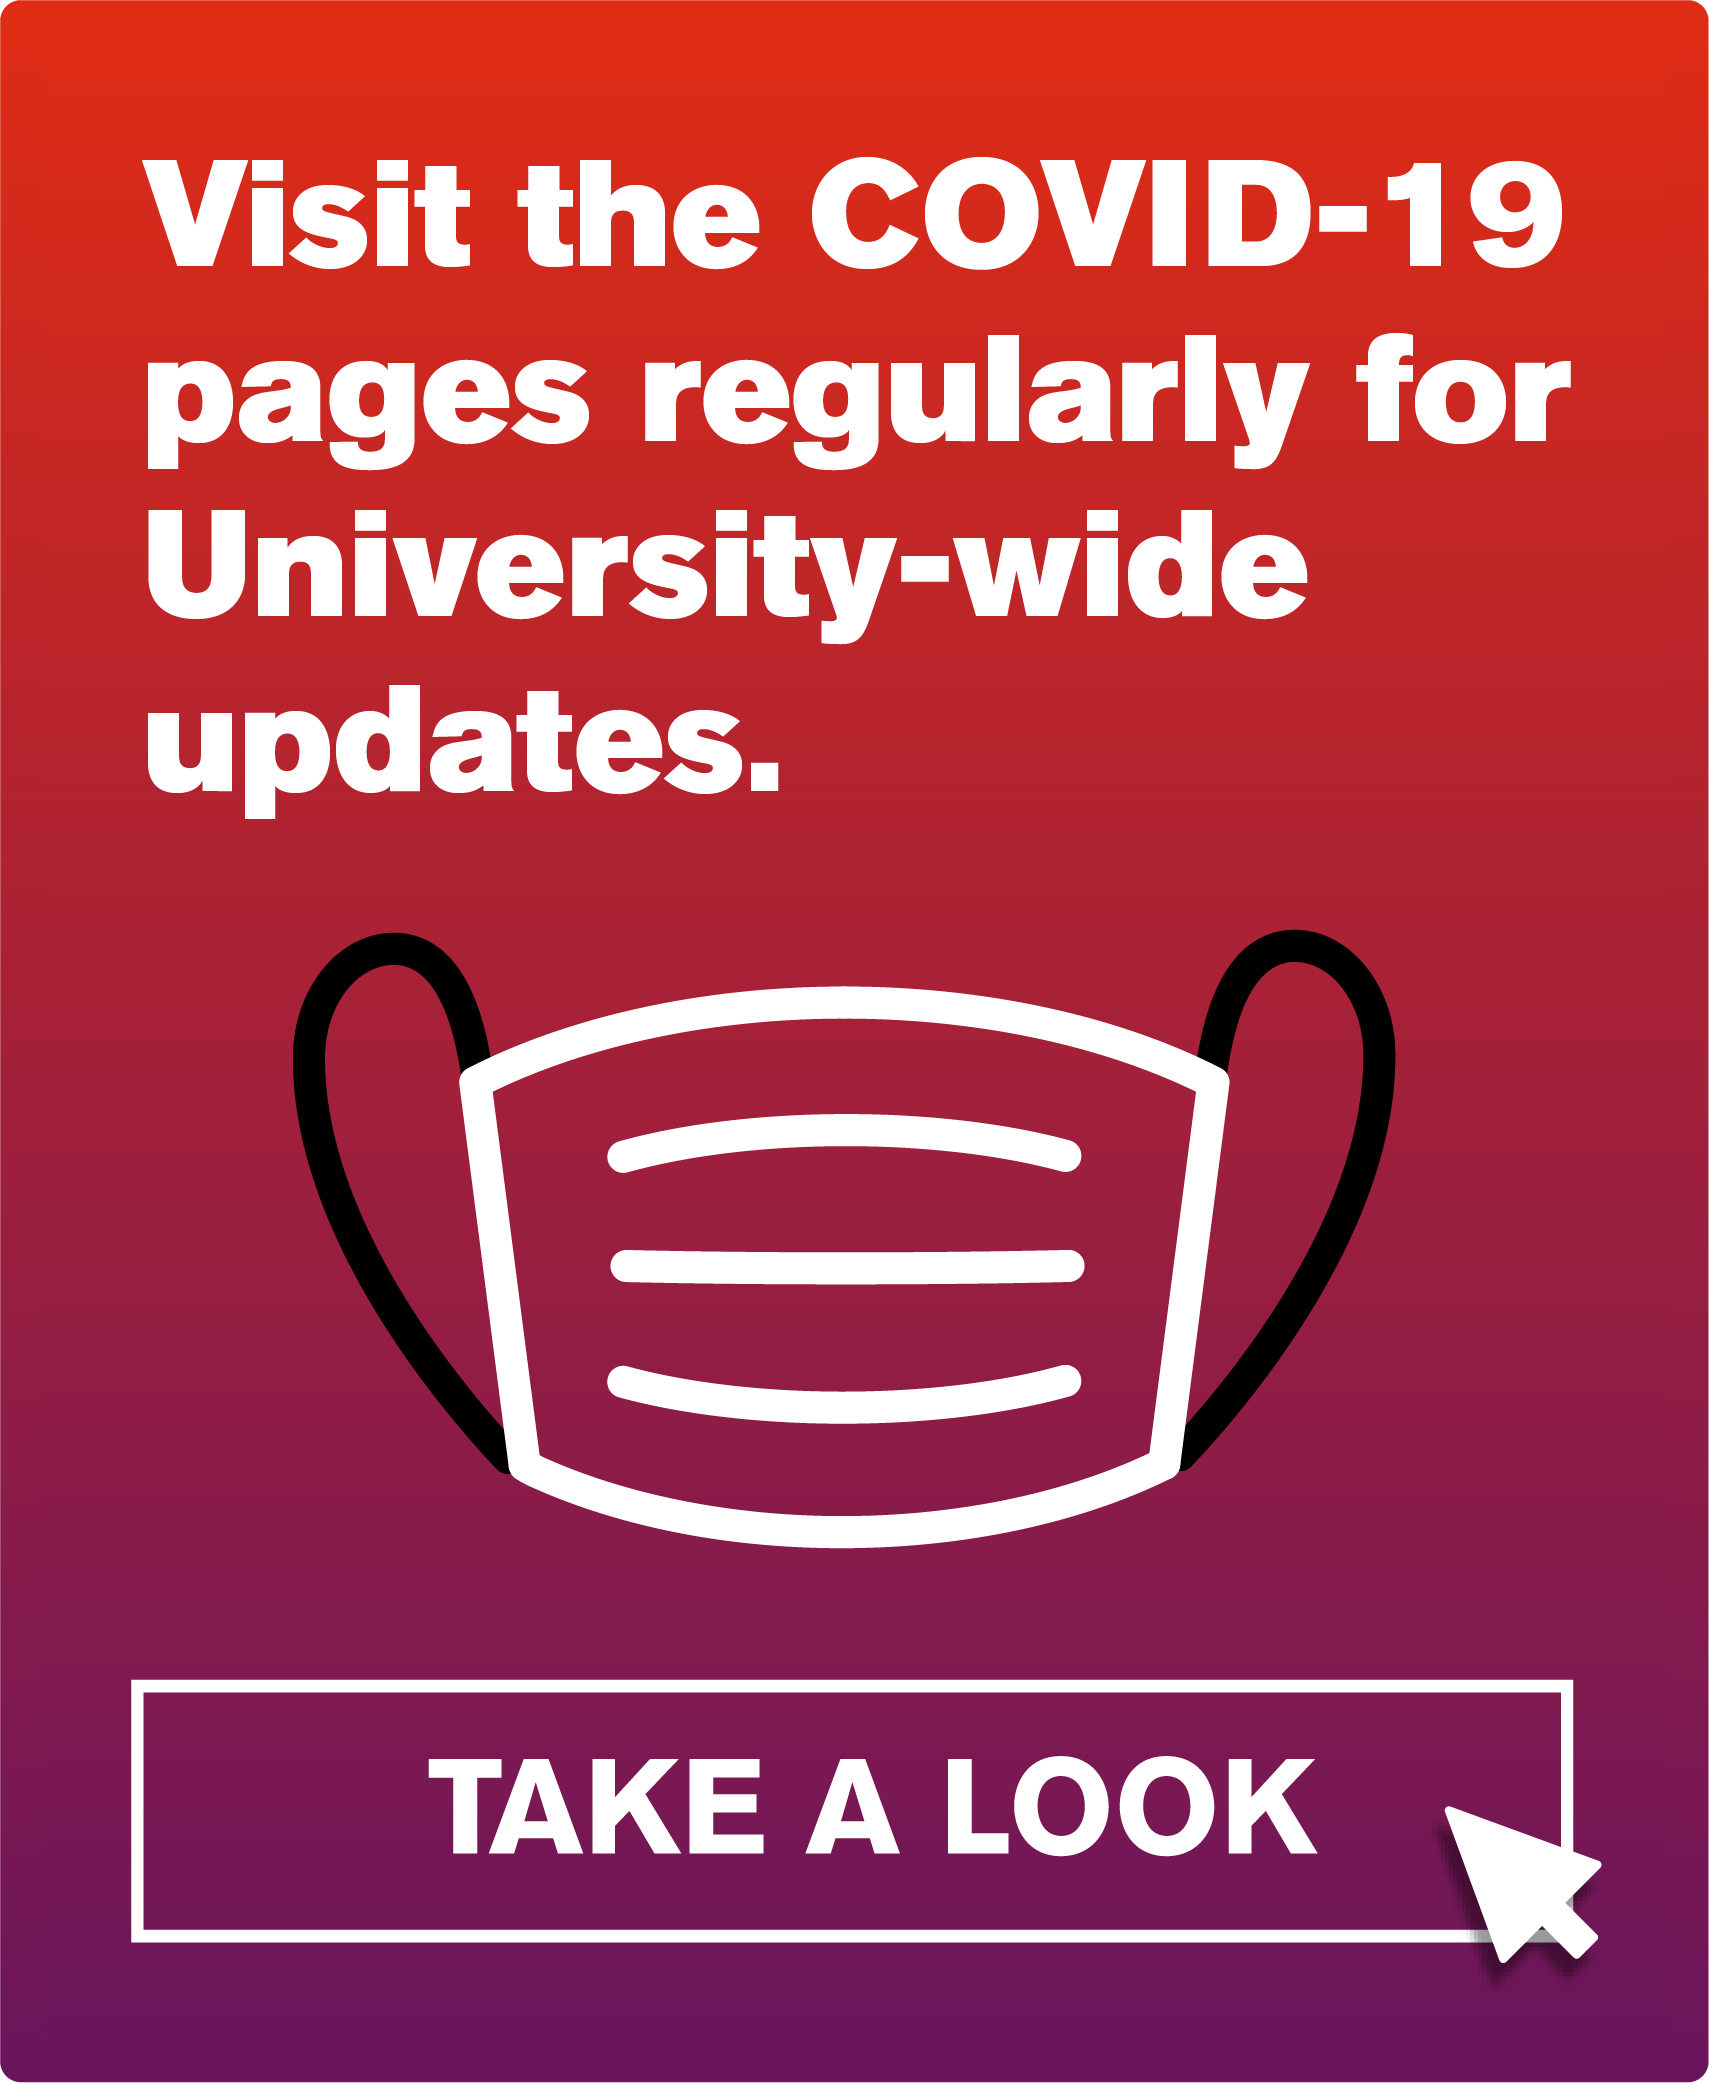 Button reads: Visit the COVID-19 pages regularly for University-wide updates